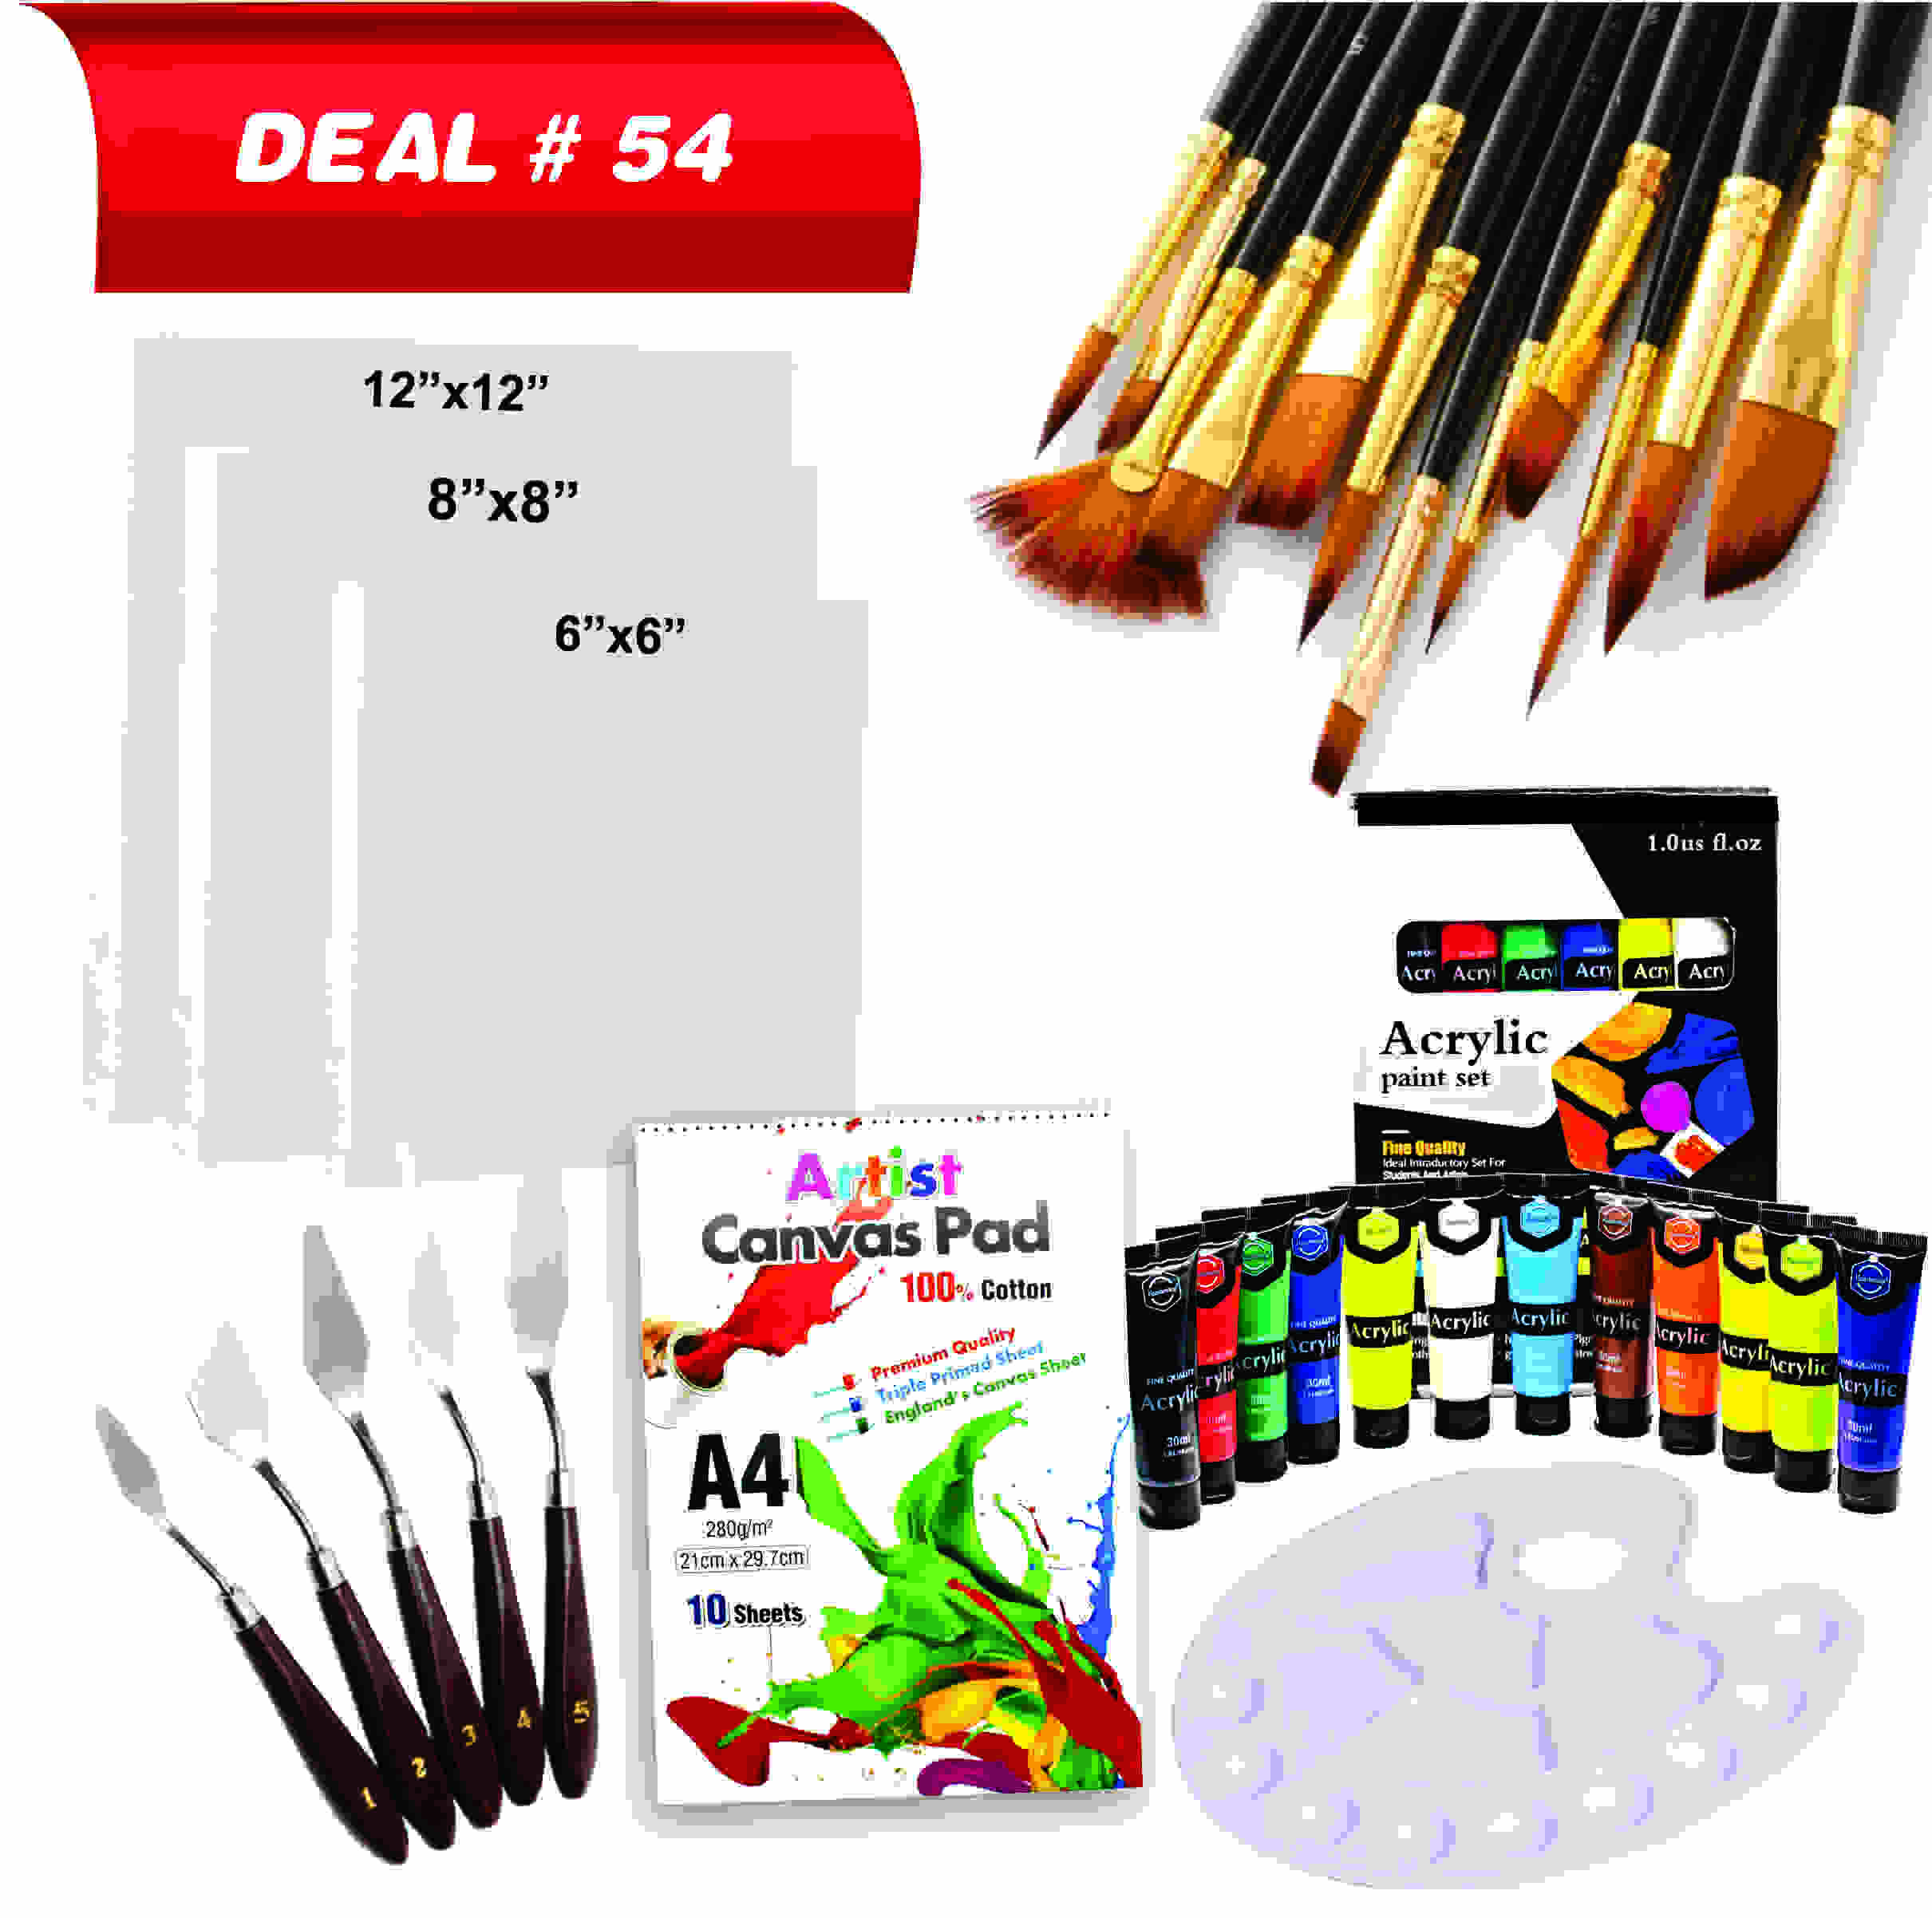 Acrylic Painting Deal for Artist, Deal No.54